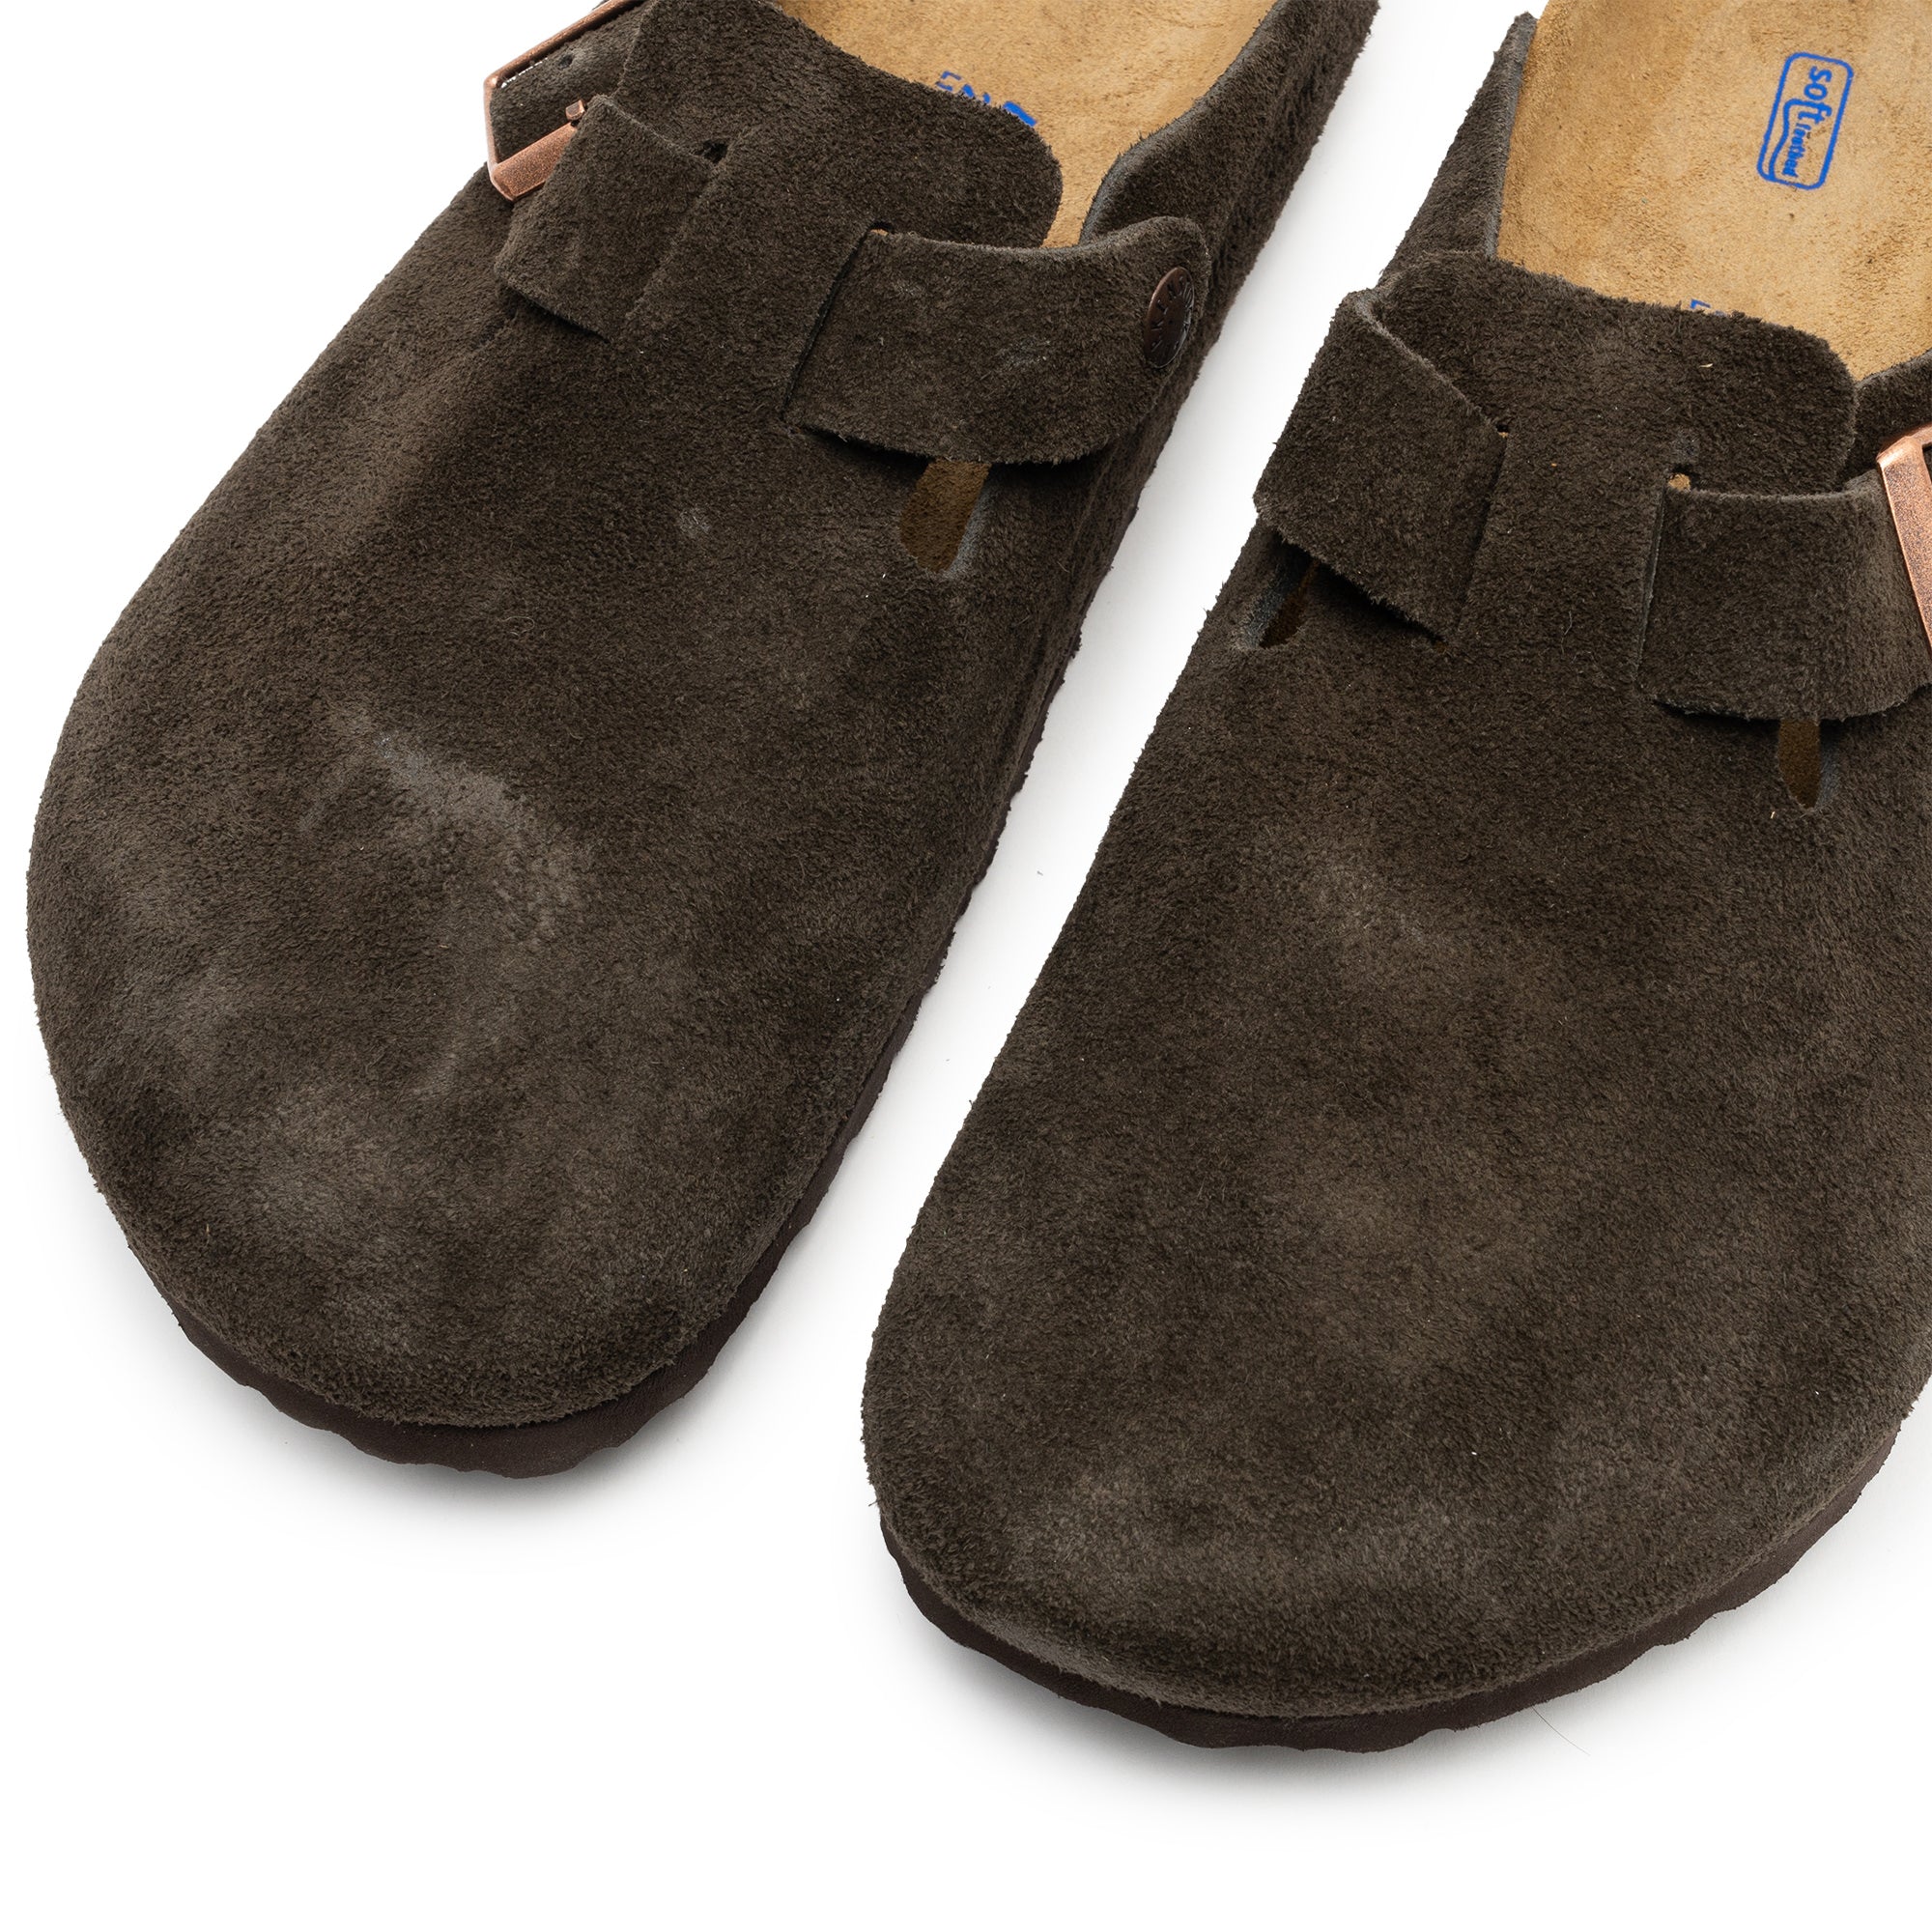 Classic suede uppers